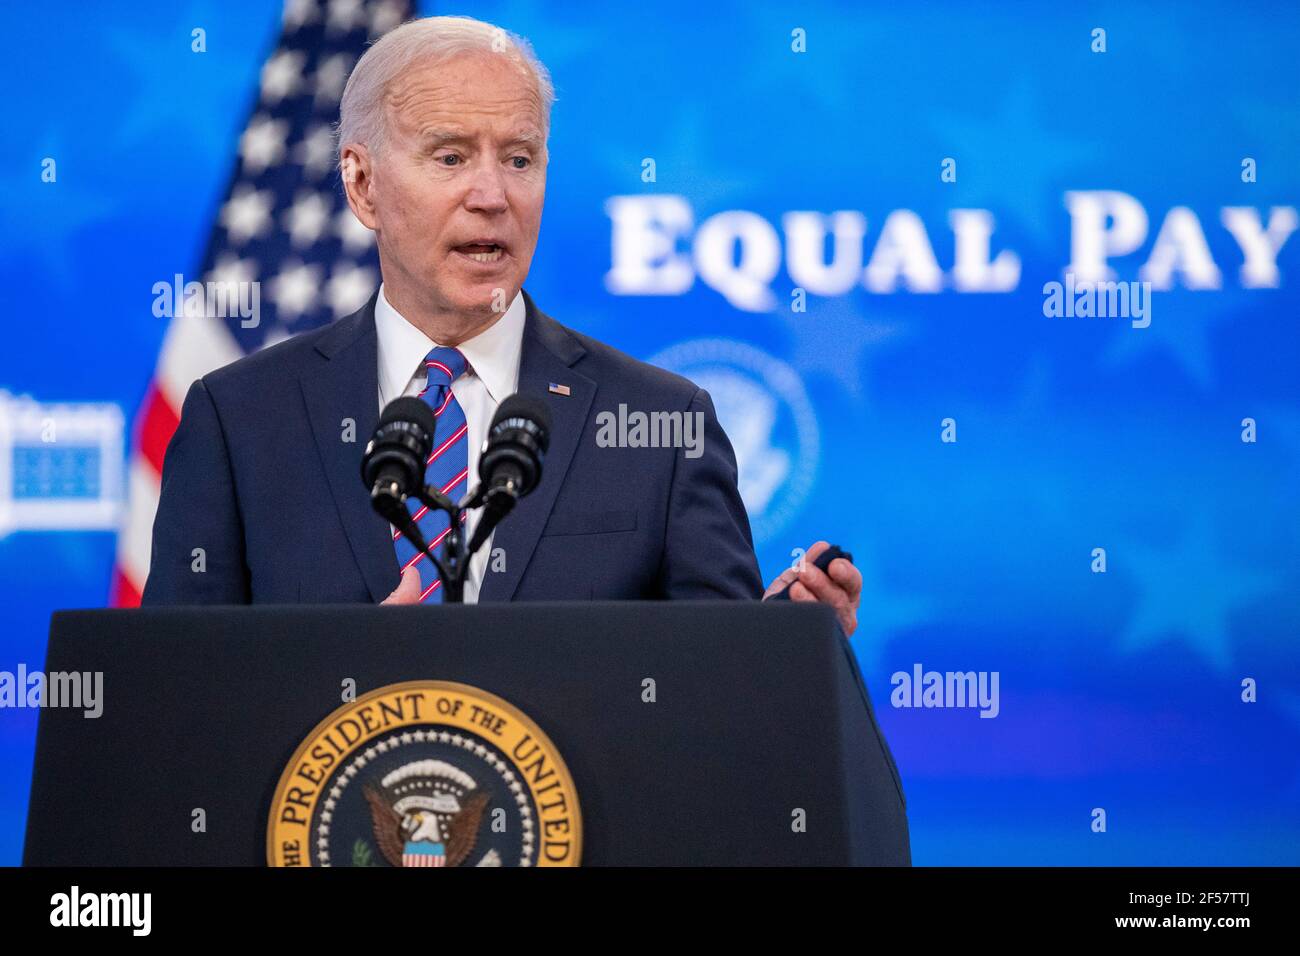 Washington, United States. 24th Mar, 2021. US President Joe Biden delivers remarks during an event to mark Equal Pay Day in the State Dining Room of the White House in Washington, DC, USA, 24 March 2021. Equal Pay Day marks the extra time it takes an average woman in the United States to earn the same pay that their male counterparts made the previous calendar year. Credit: Sipa USA/Alamy Live News Stock Photo